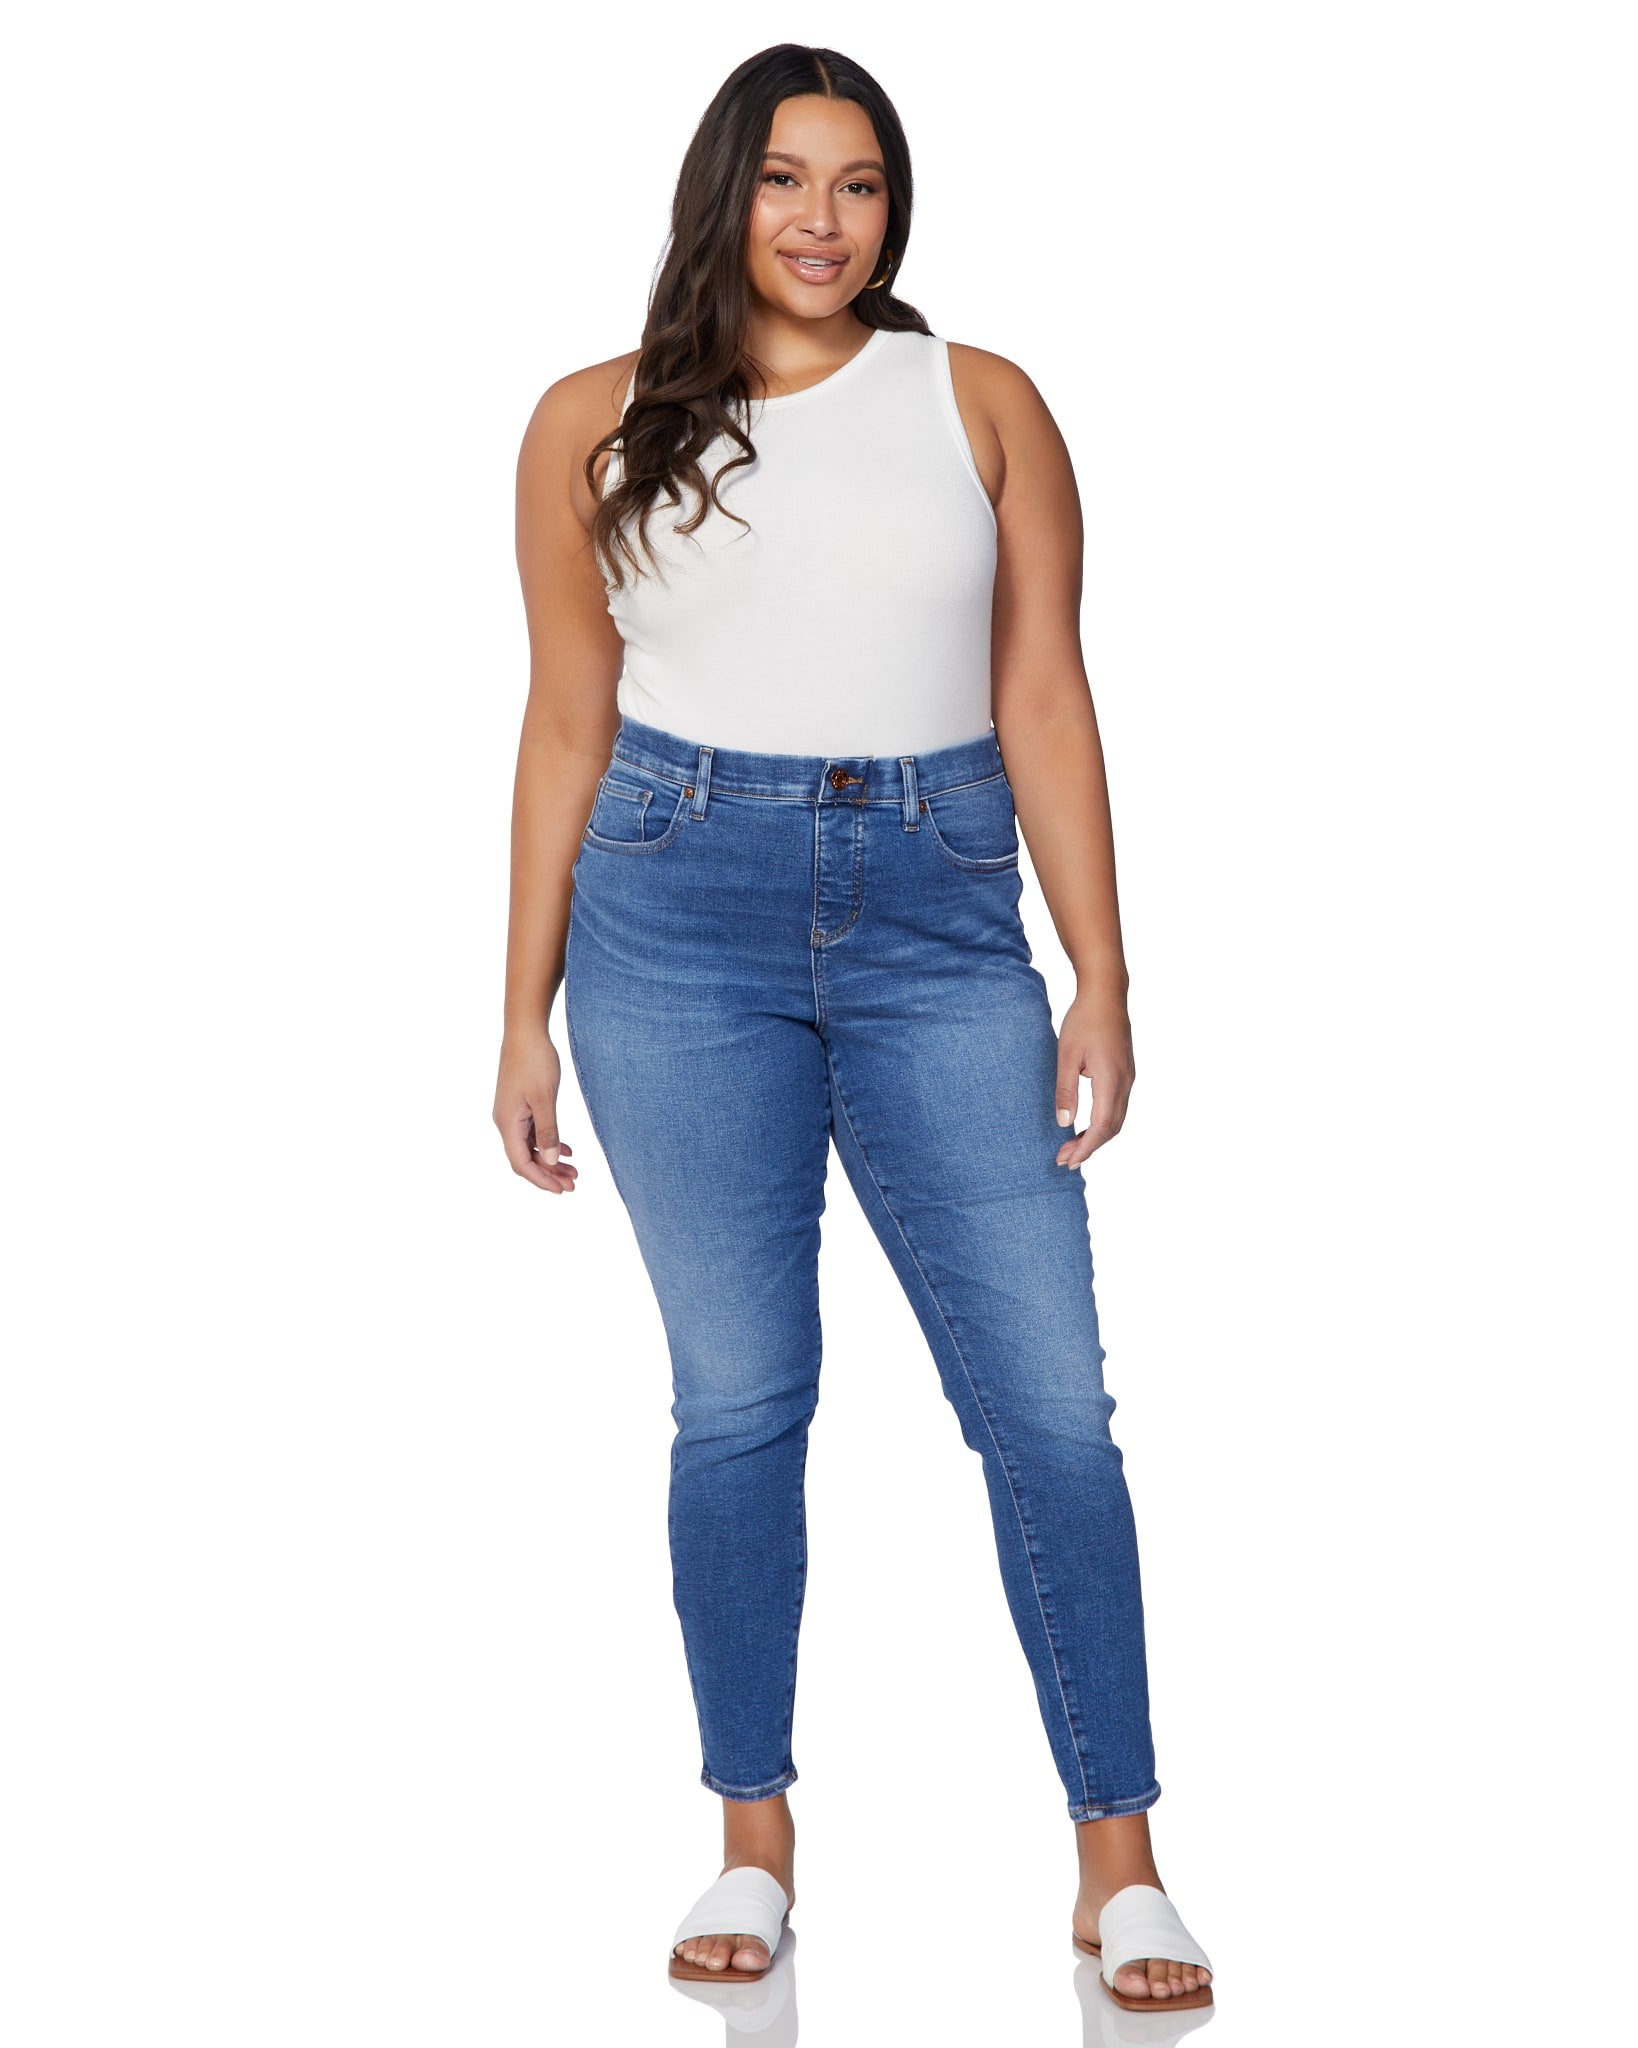 Jag Jeans Women's Plus Size Nora Mid Rise Skinny Pull-on Jeans